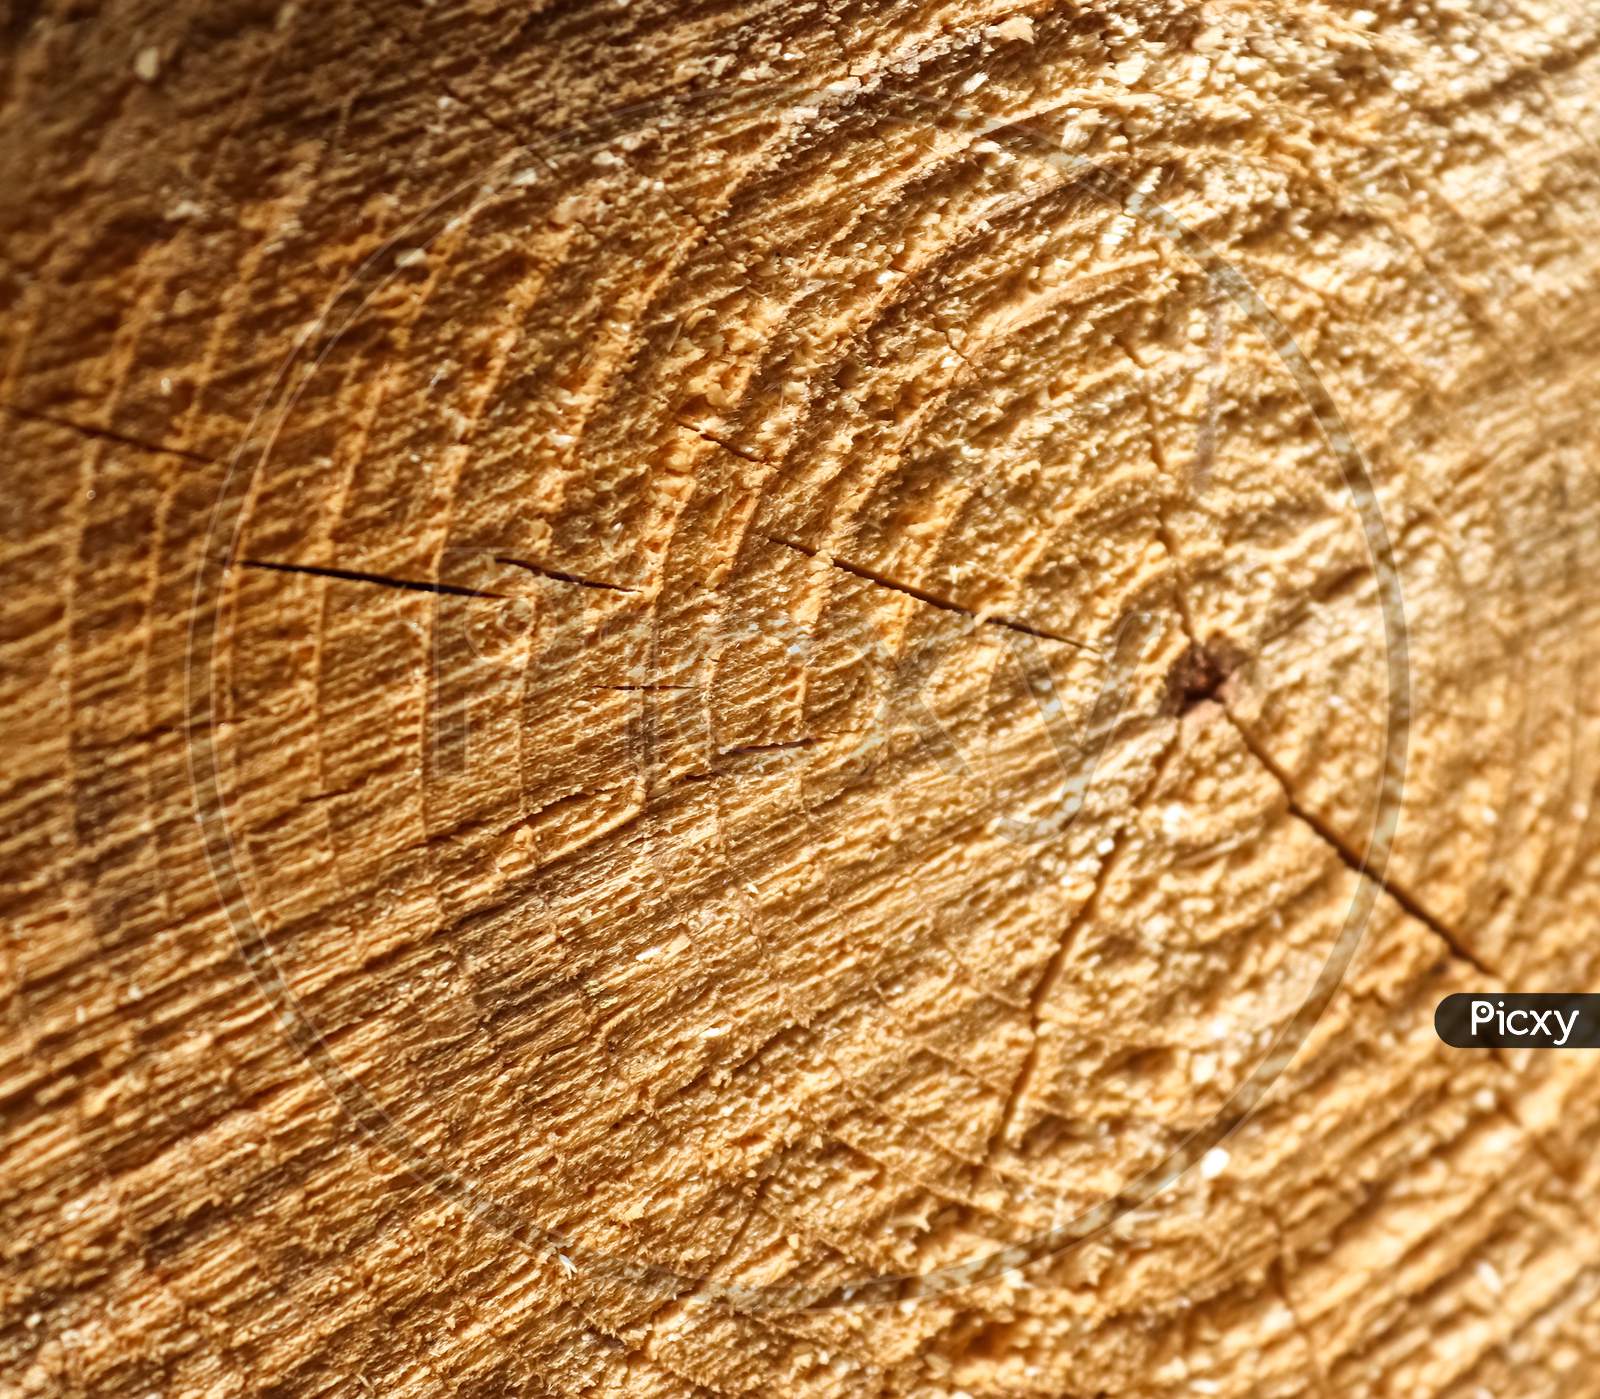 Fresh Sawed Wood In A Close Up View. Detailed Texture Of Annual Rings In A Wooden Surface.